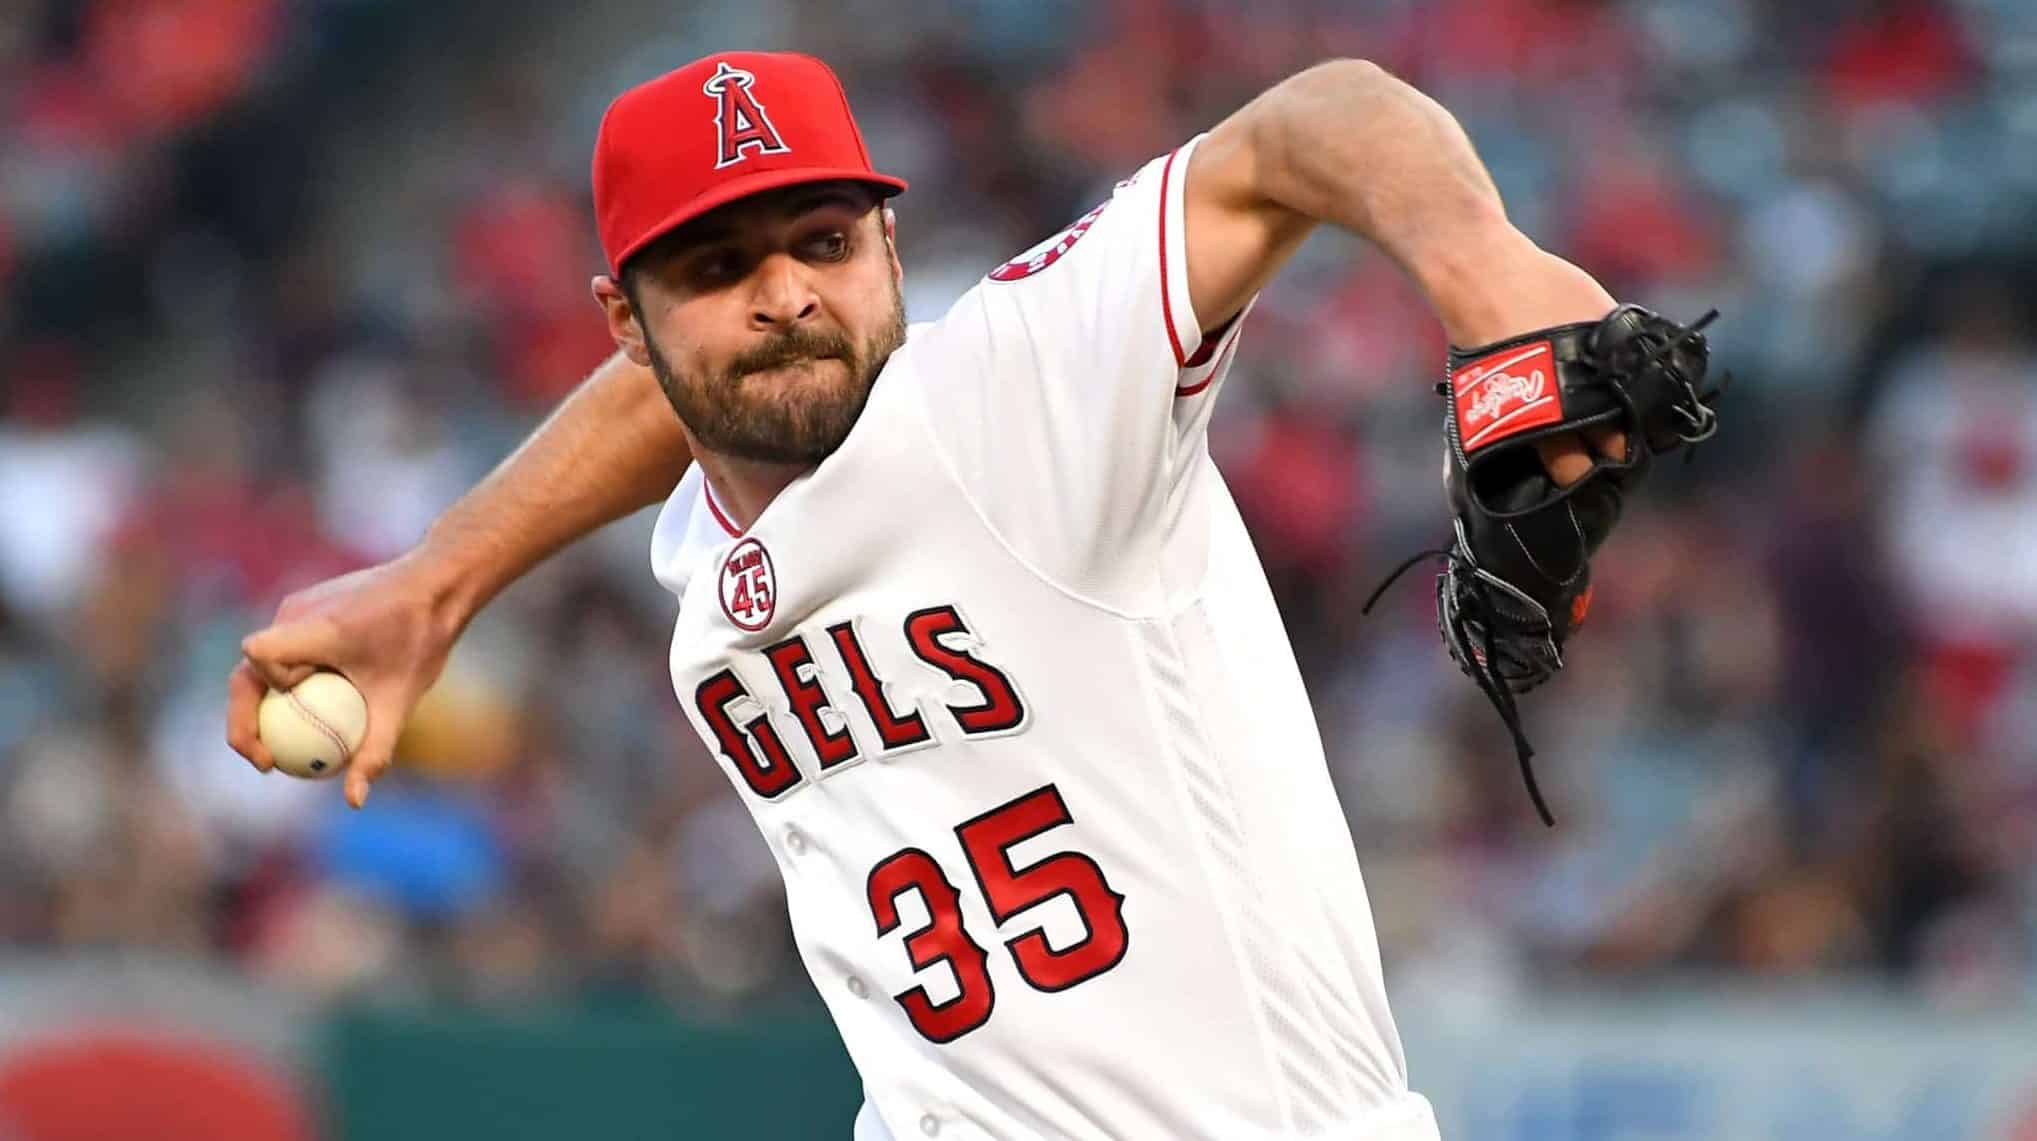 ANAHEIM, CA - JULY 26: Nick Tropeano #35 of the Los Angeles Angels pitches in the first inning of the game against the Baltimore Orioles at Angel Stadium of Anaheim on July 26, 2019 in Anaheim, California.